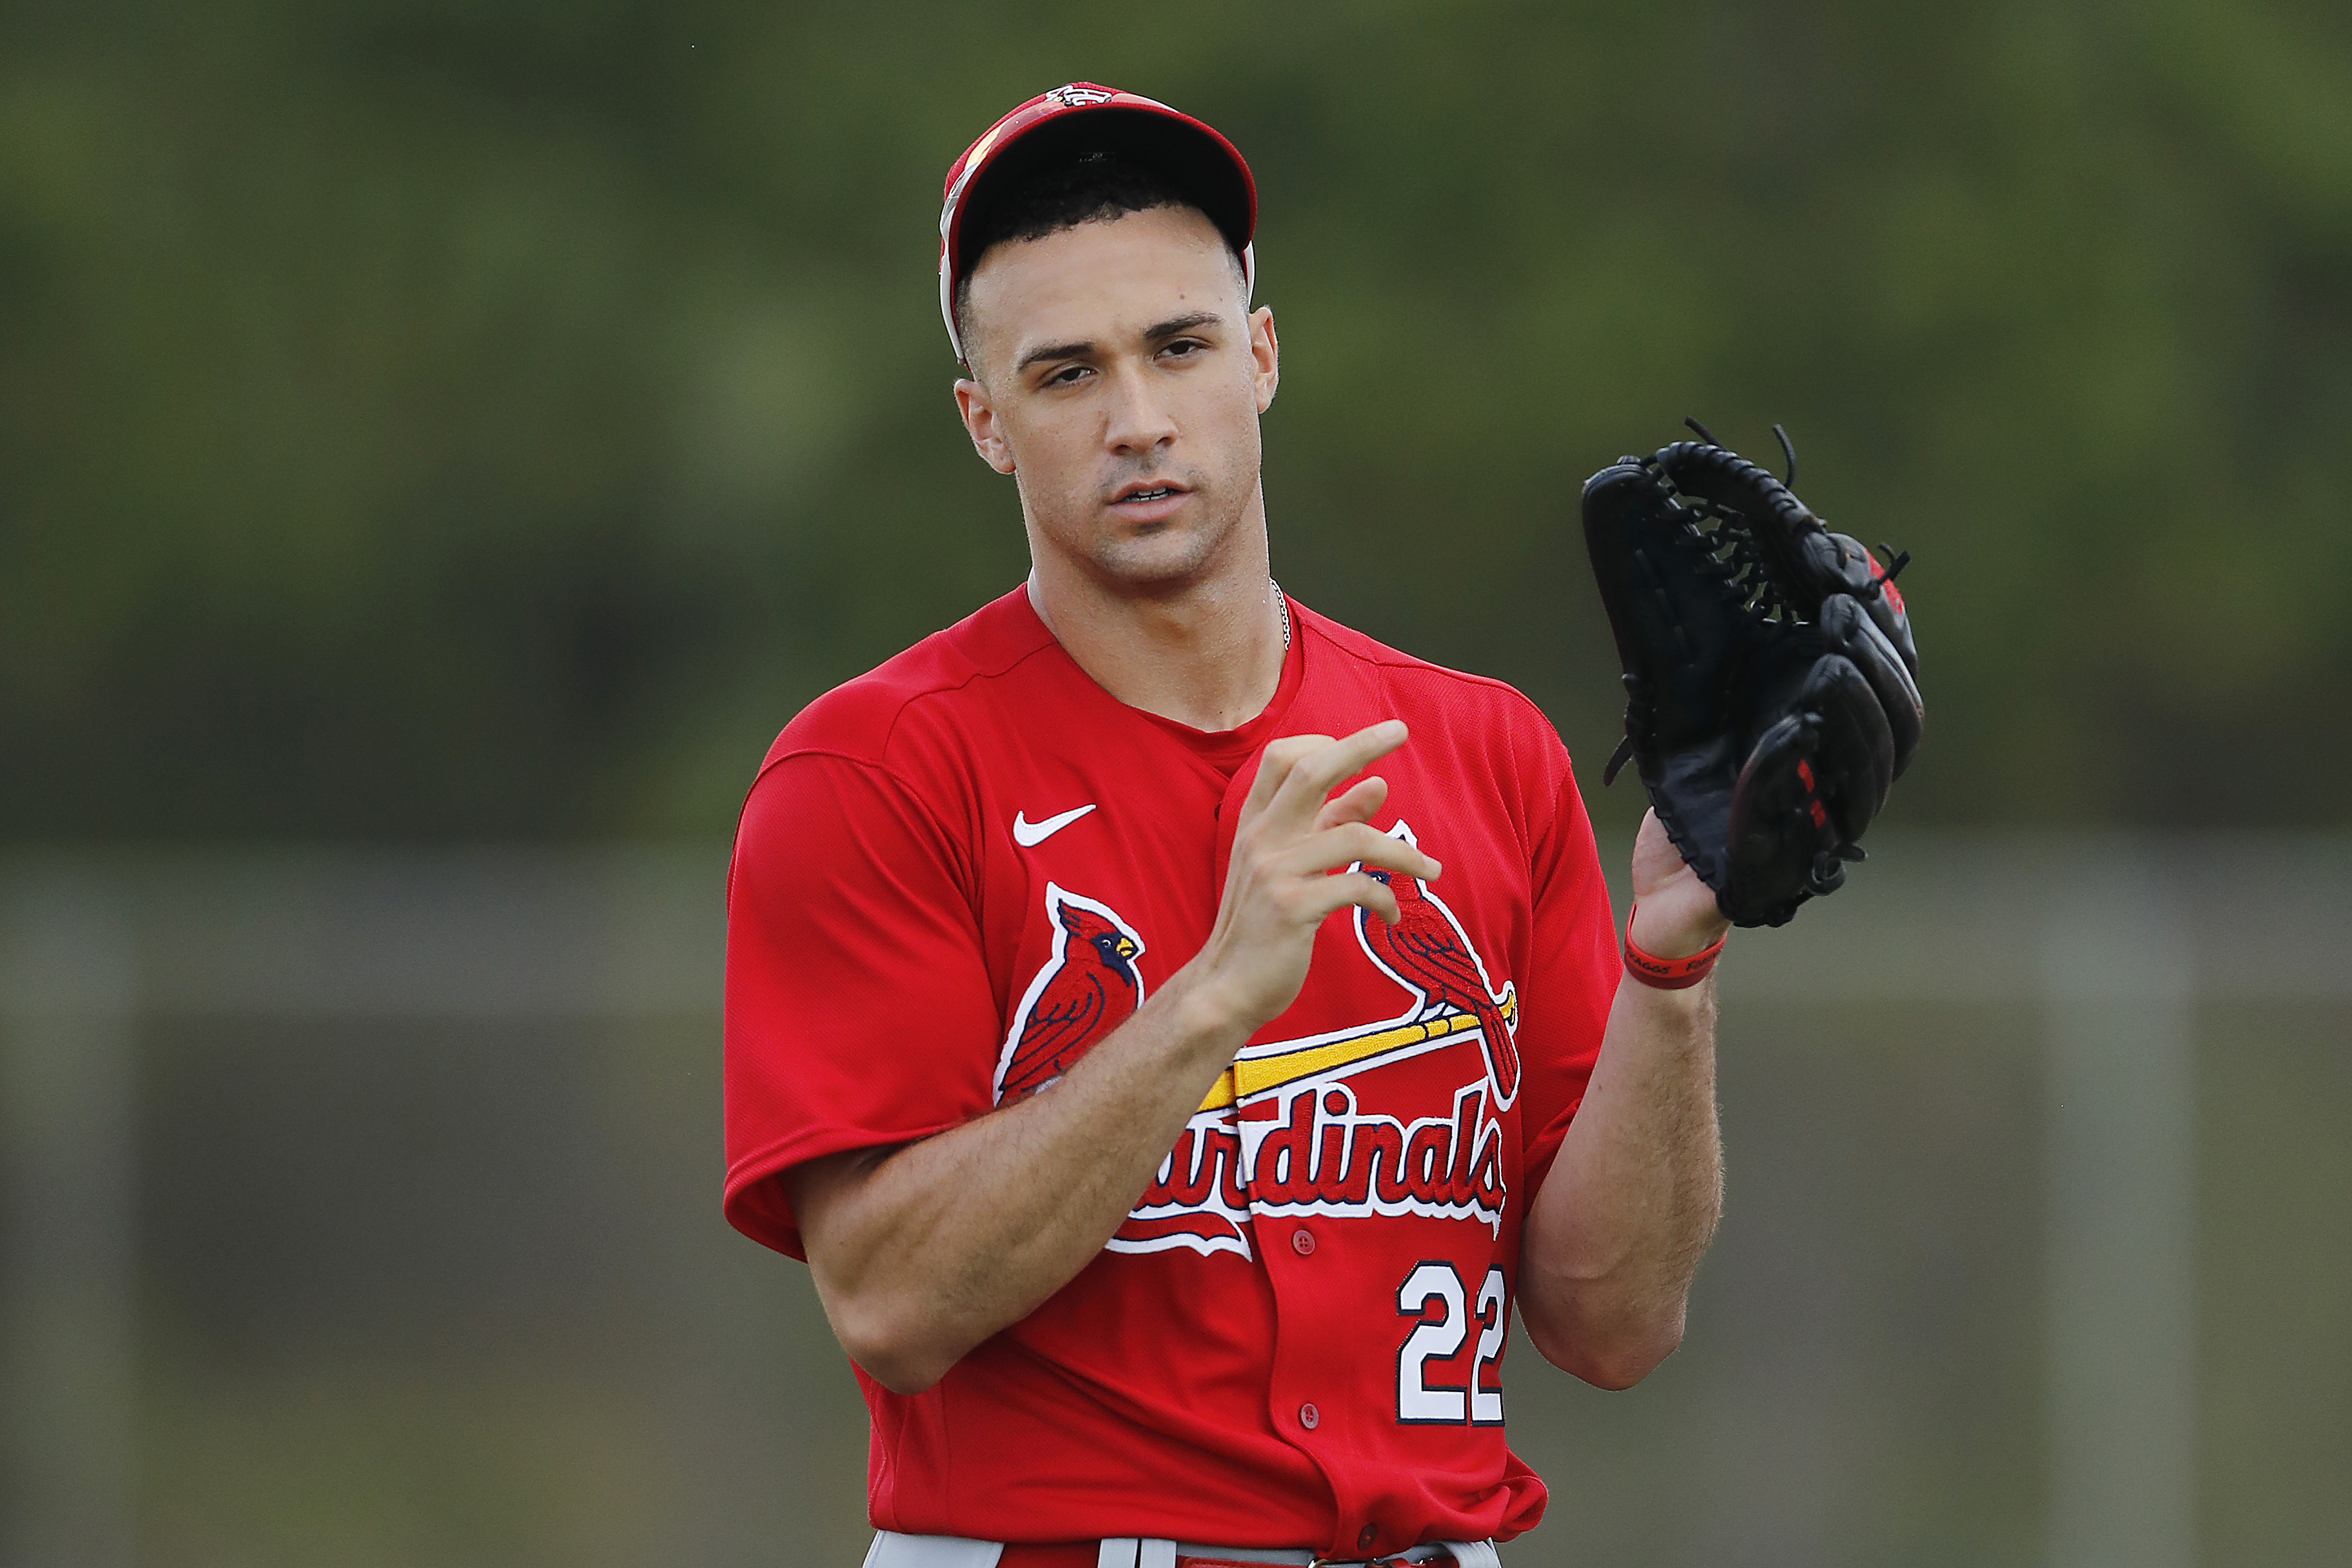 Cardinals Pitcher Jack Flaherty Just Told Fans Not to ‘Throw in the Towel and Give Up on 2020 Yet’